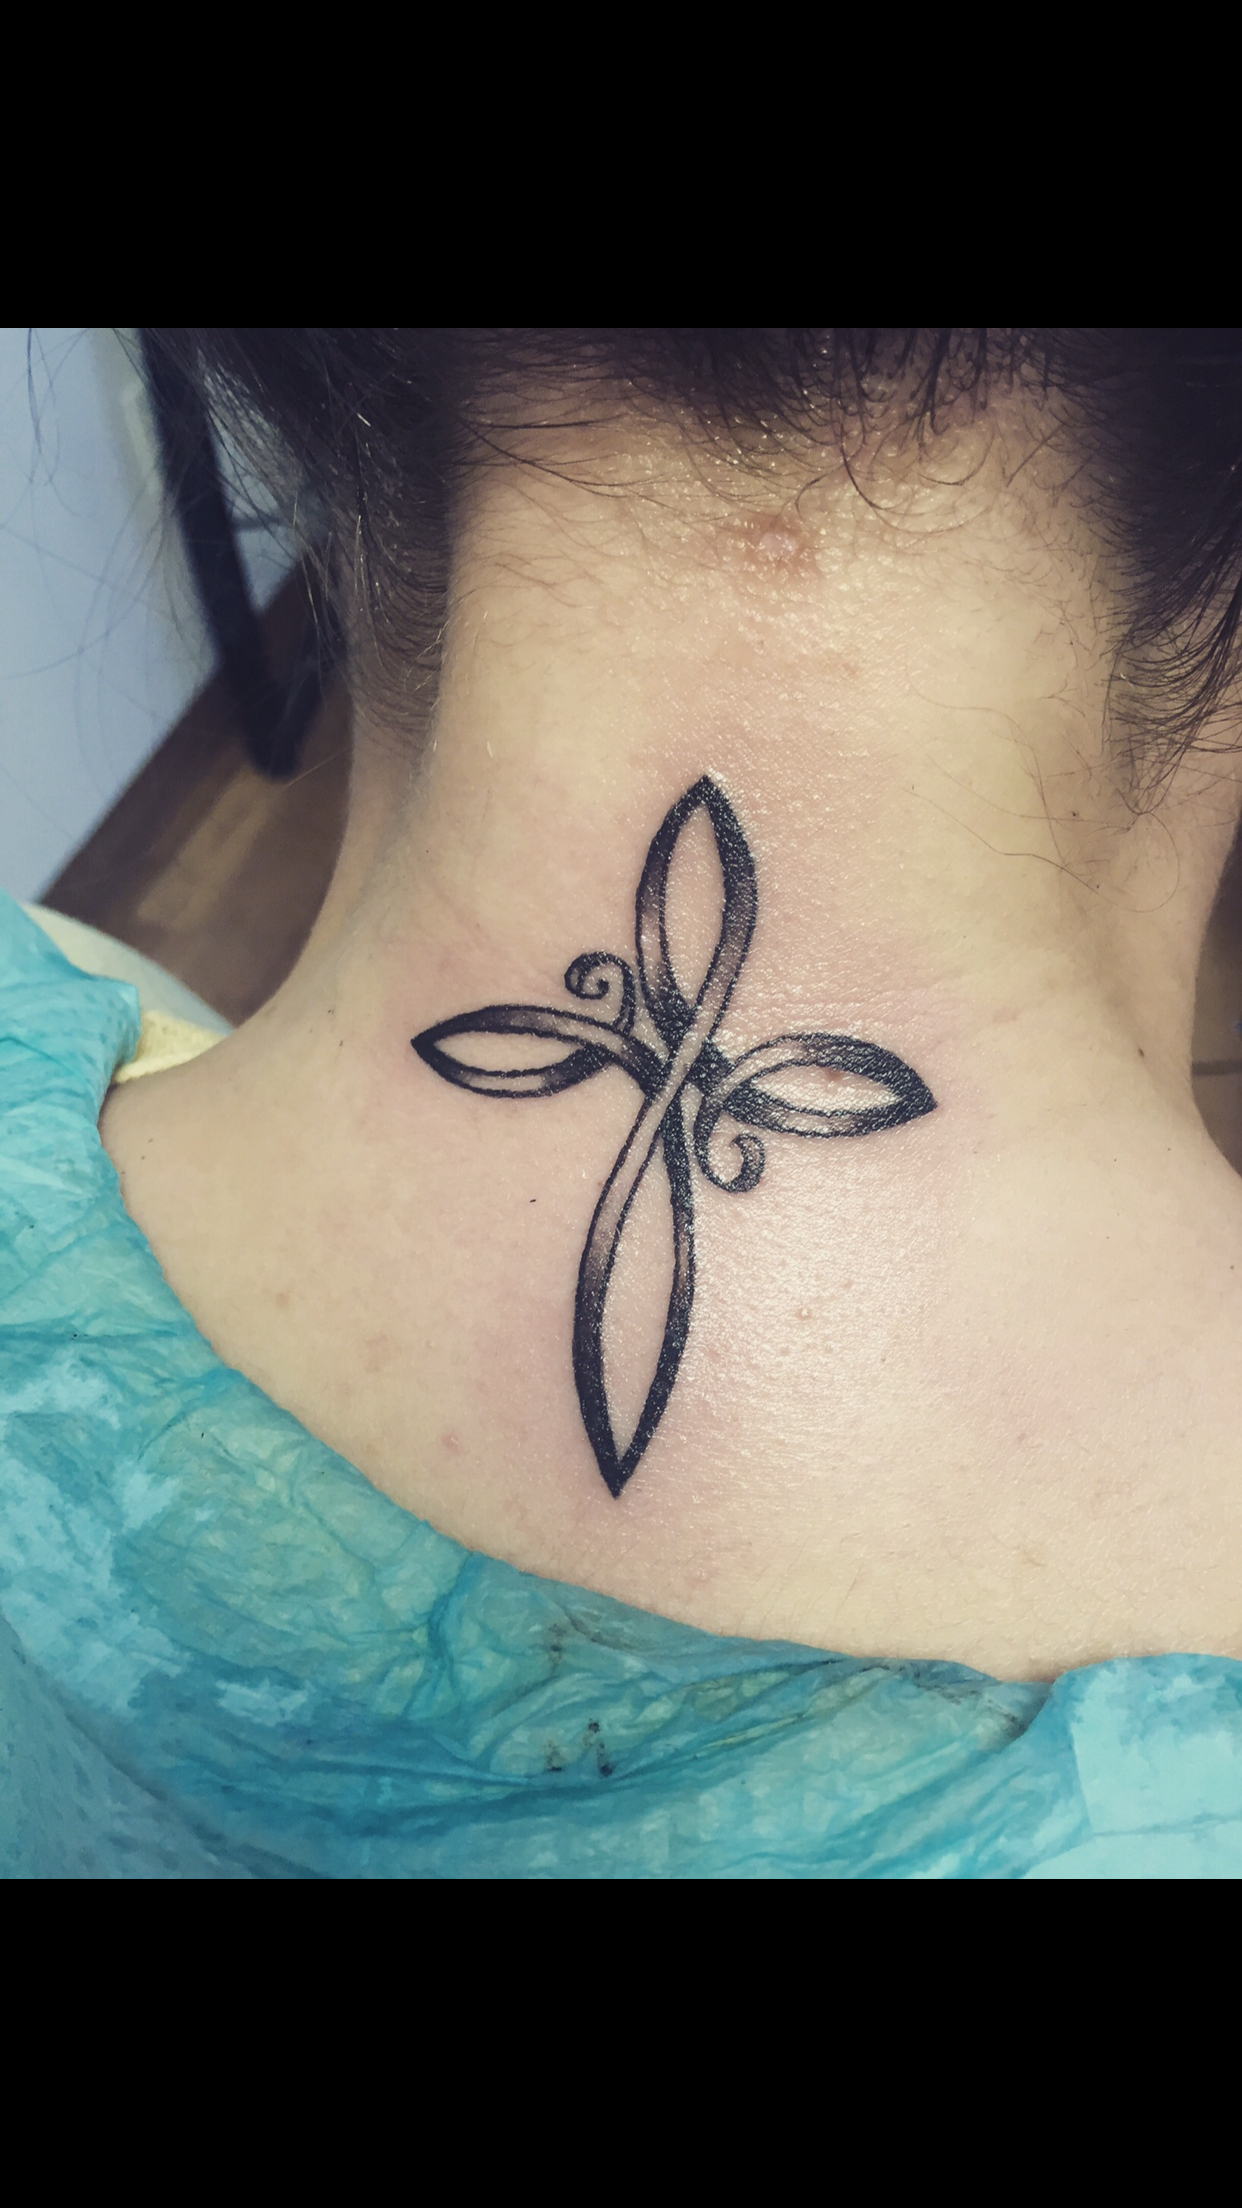 My Infinity Cross Tattoo Meaning That Jesus Loves Me Infinitely And intended for dimensions 1242 X 2208